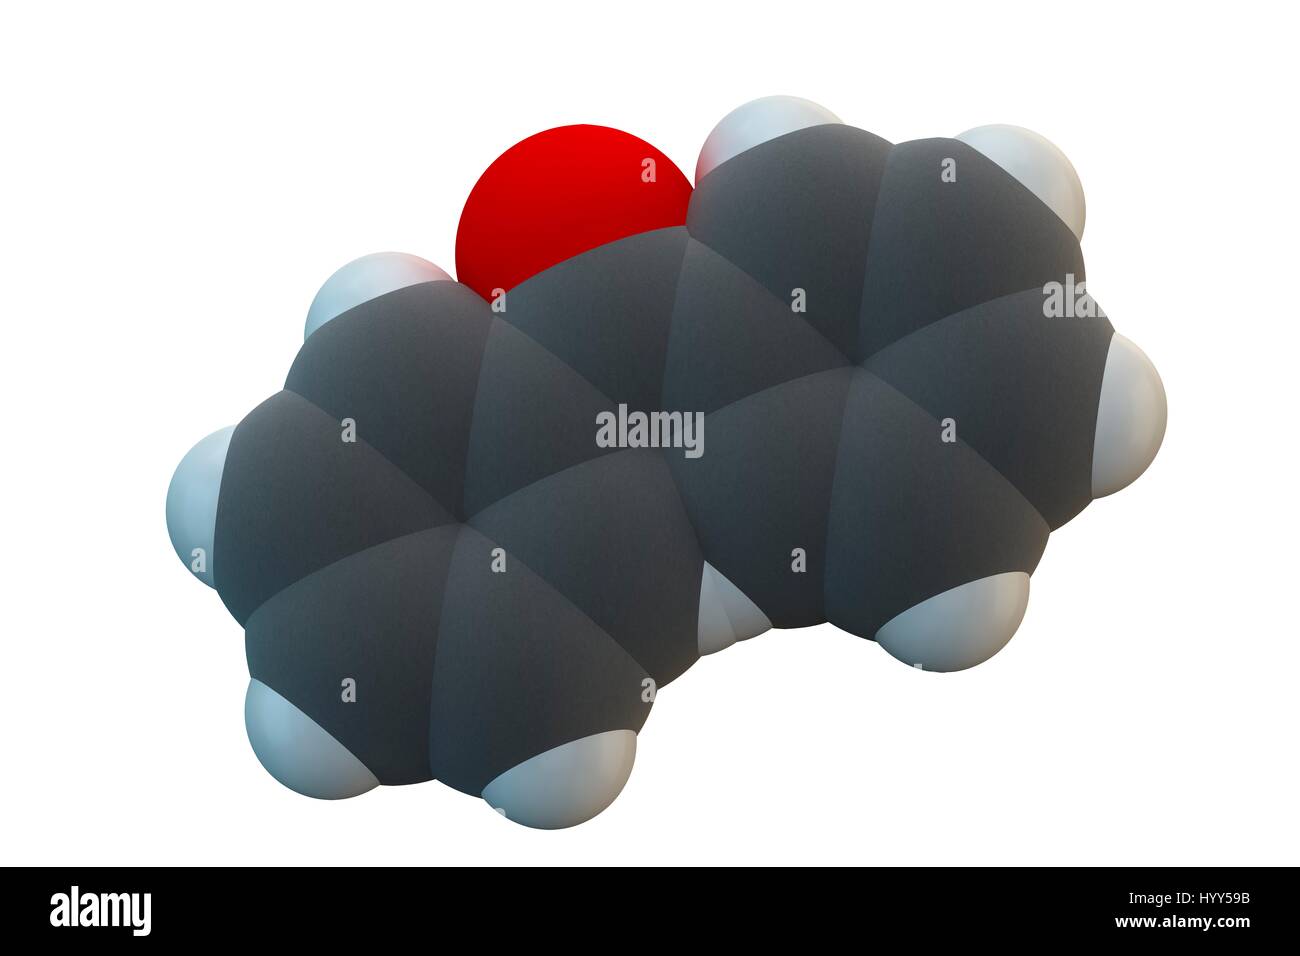 Benzophenone molecule. Chemical formula is C13H10O. Atoms are represented as spheres: carbon (grey), hydrogen (white), oxygen (red). Illustration. Stock Photo